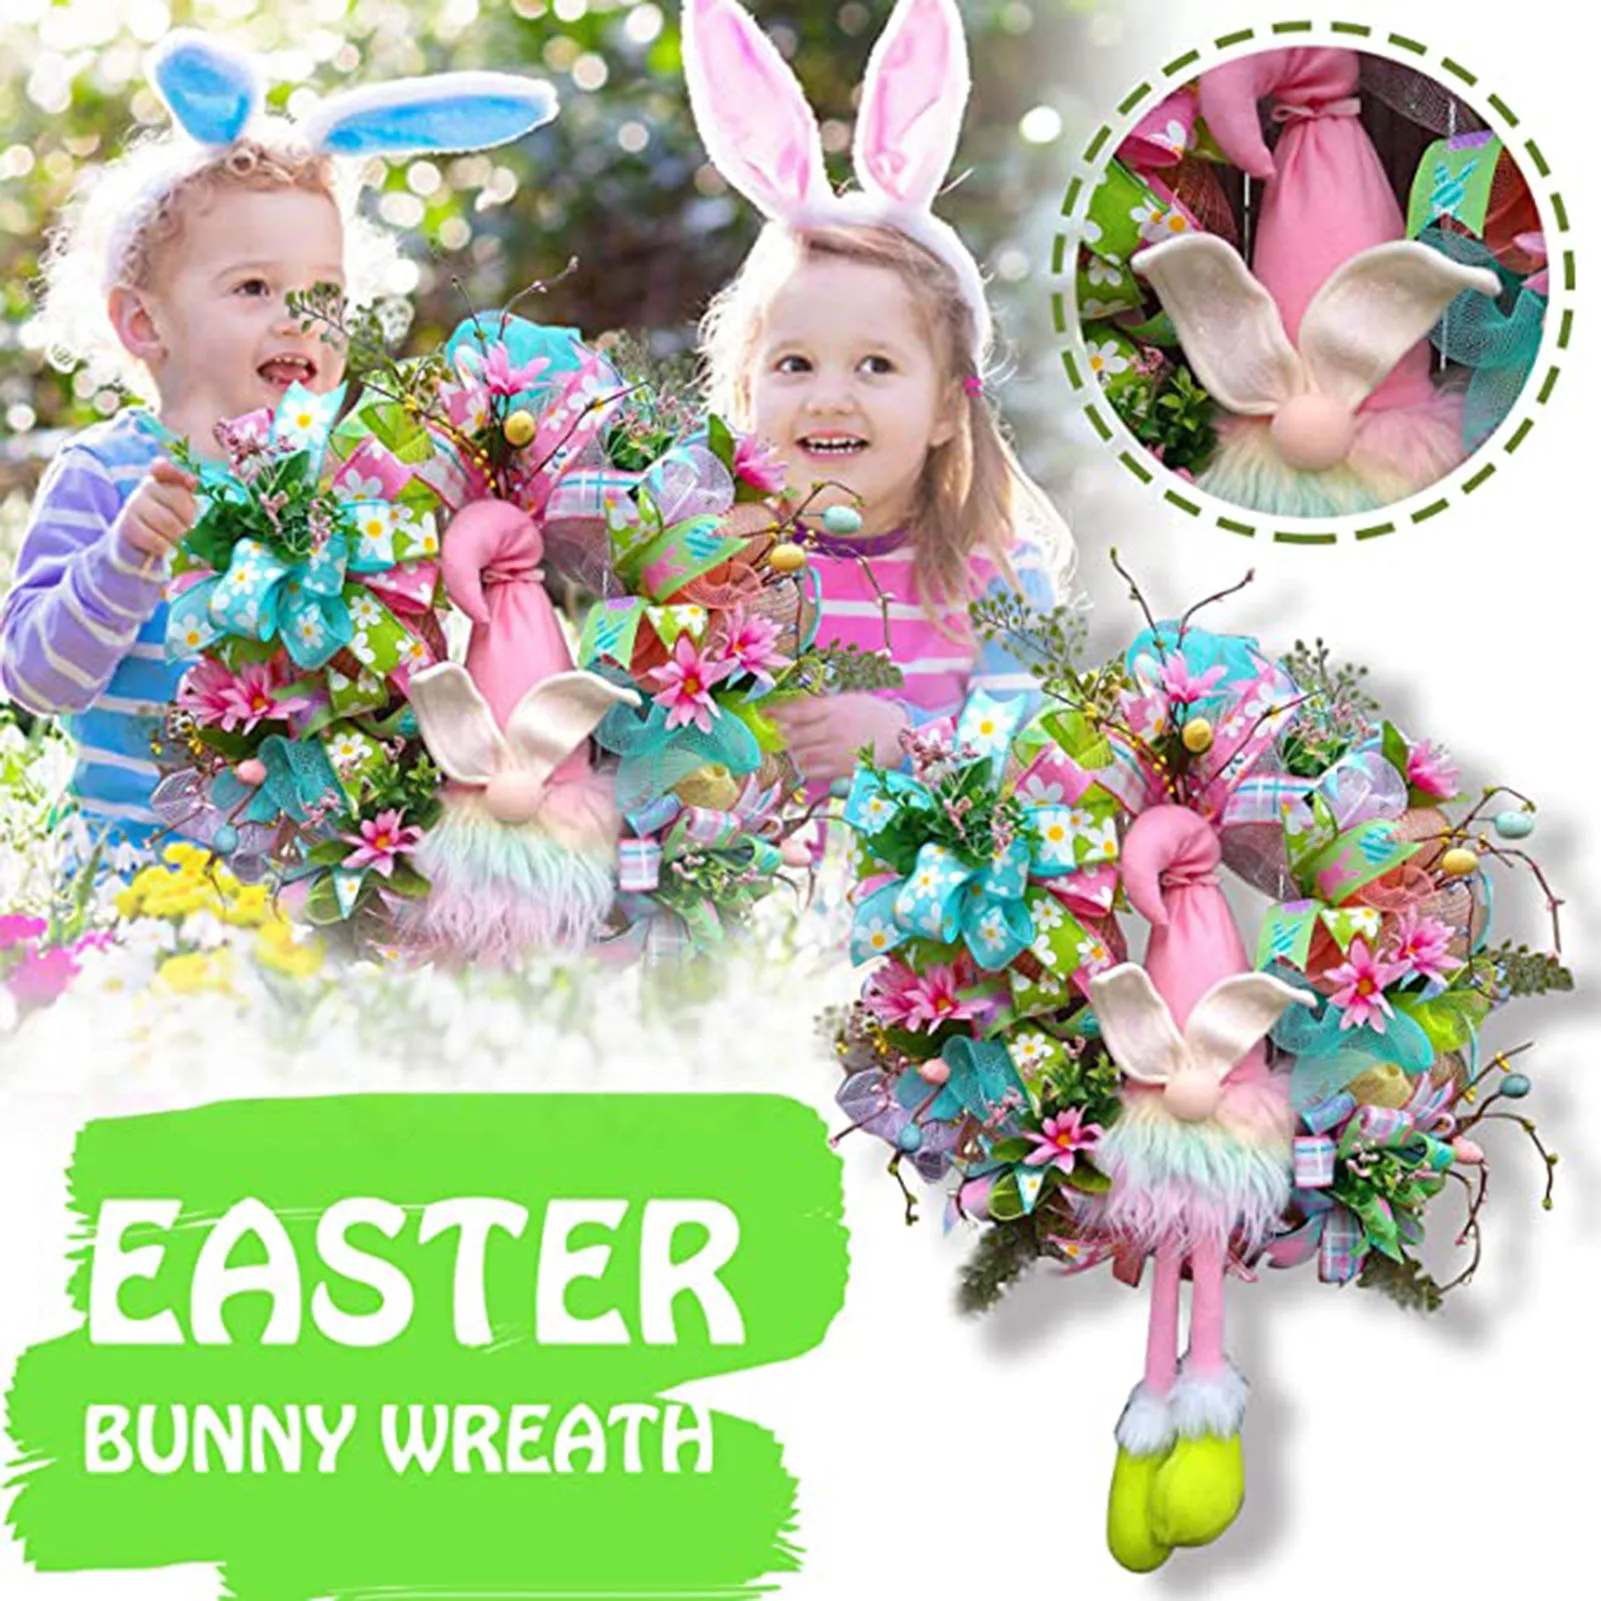 

Easter Hanging Wreath Bunny Garland Themed Dwarf Dolls Ornament Prop Festival Decor Gifts for Door Wall F2